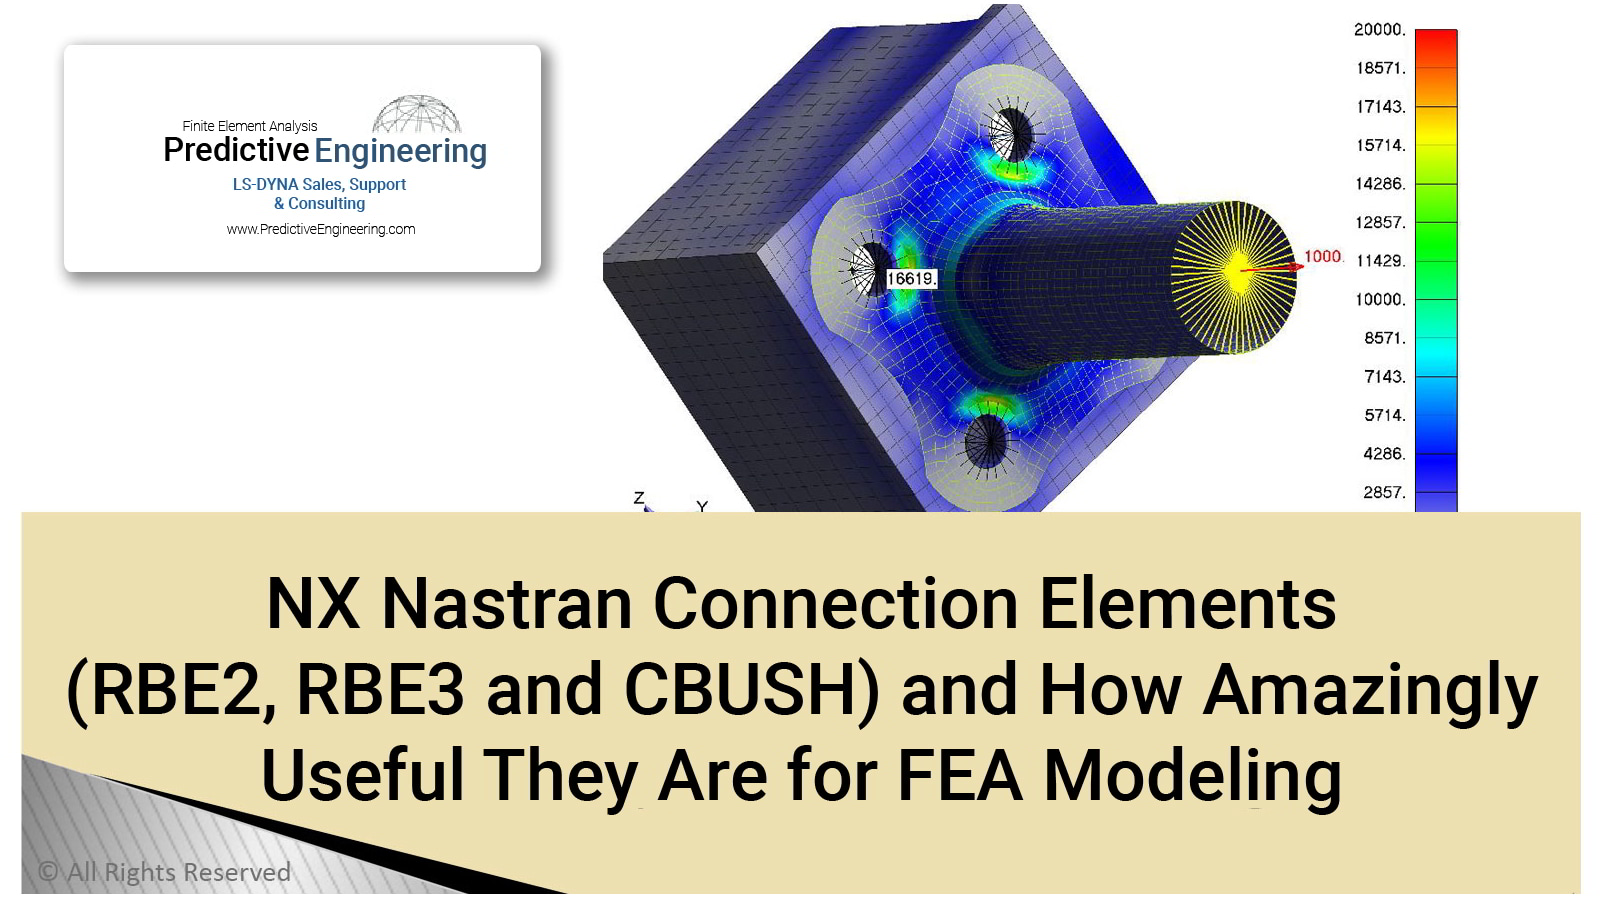 Small Connection Elements (RBE2, RBE3 and CBUSH) Image